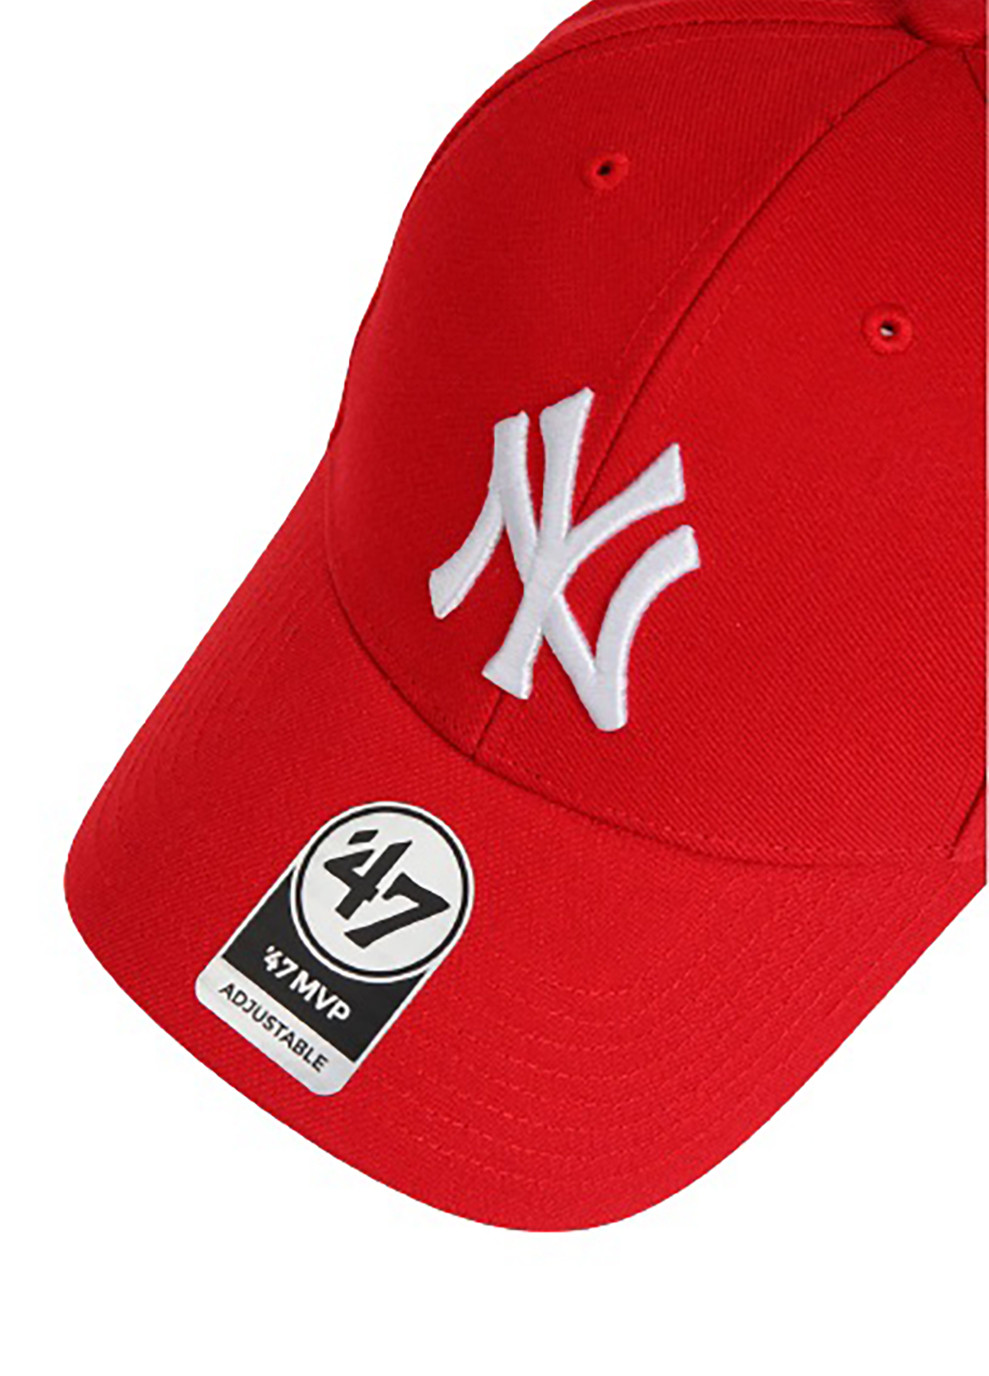 Кепка MVP YANKEES/YANKEES One Size Grey/Red 47 Brand (258144427)